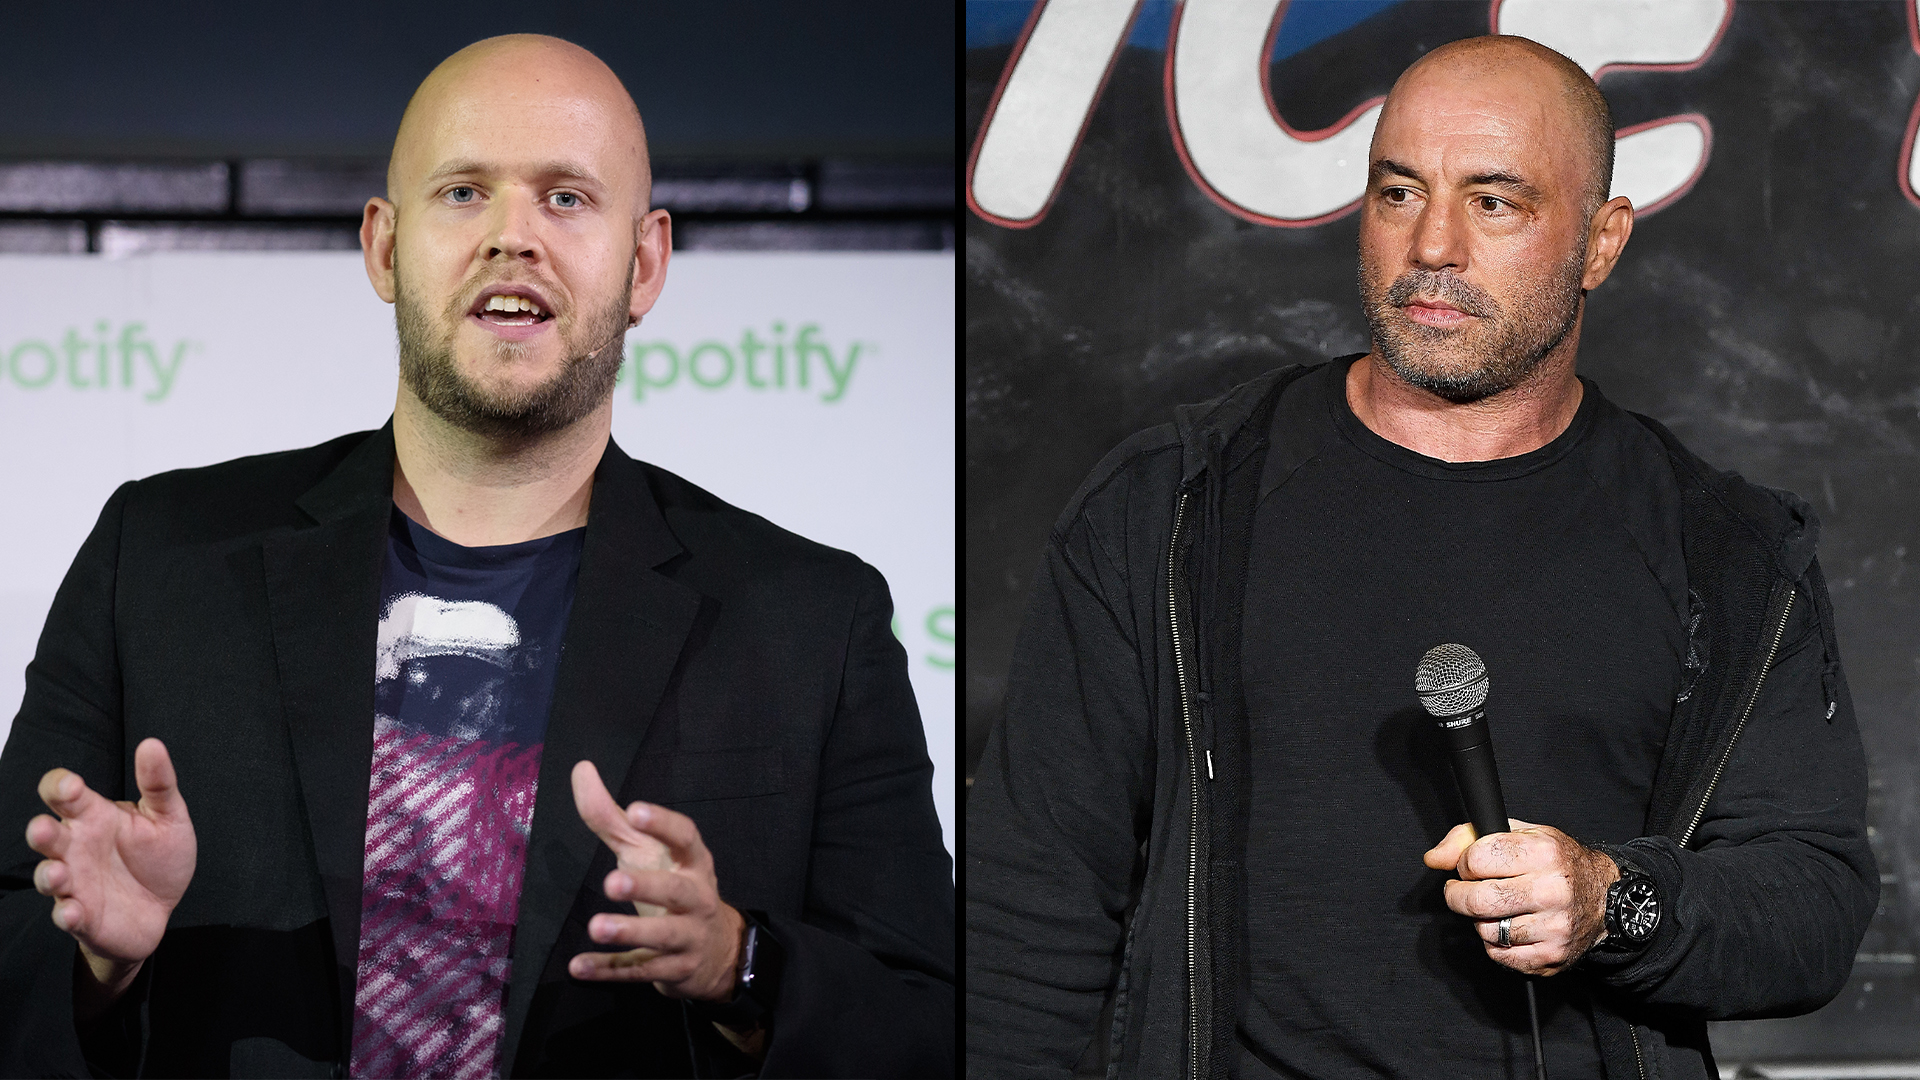 Spotify CEO Daniel Ek To Keep Joe Rogan On The Platform Amid The Podcaster's Racism Controversy